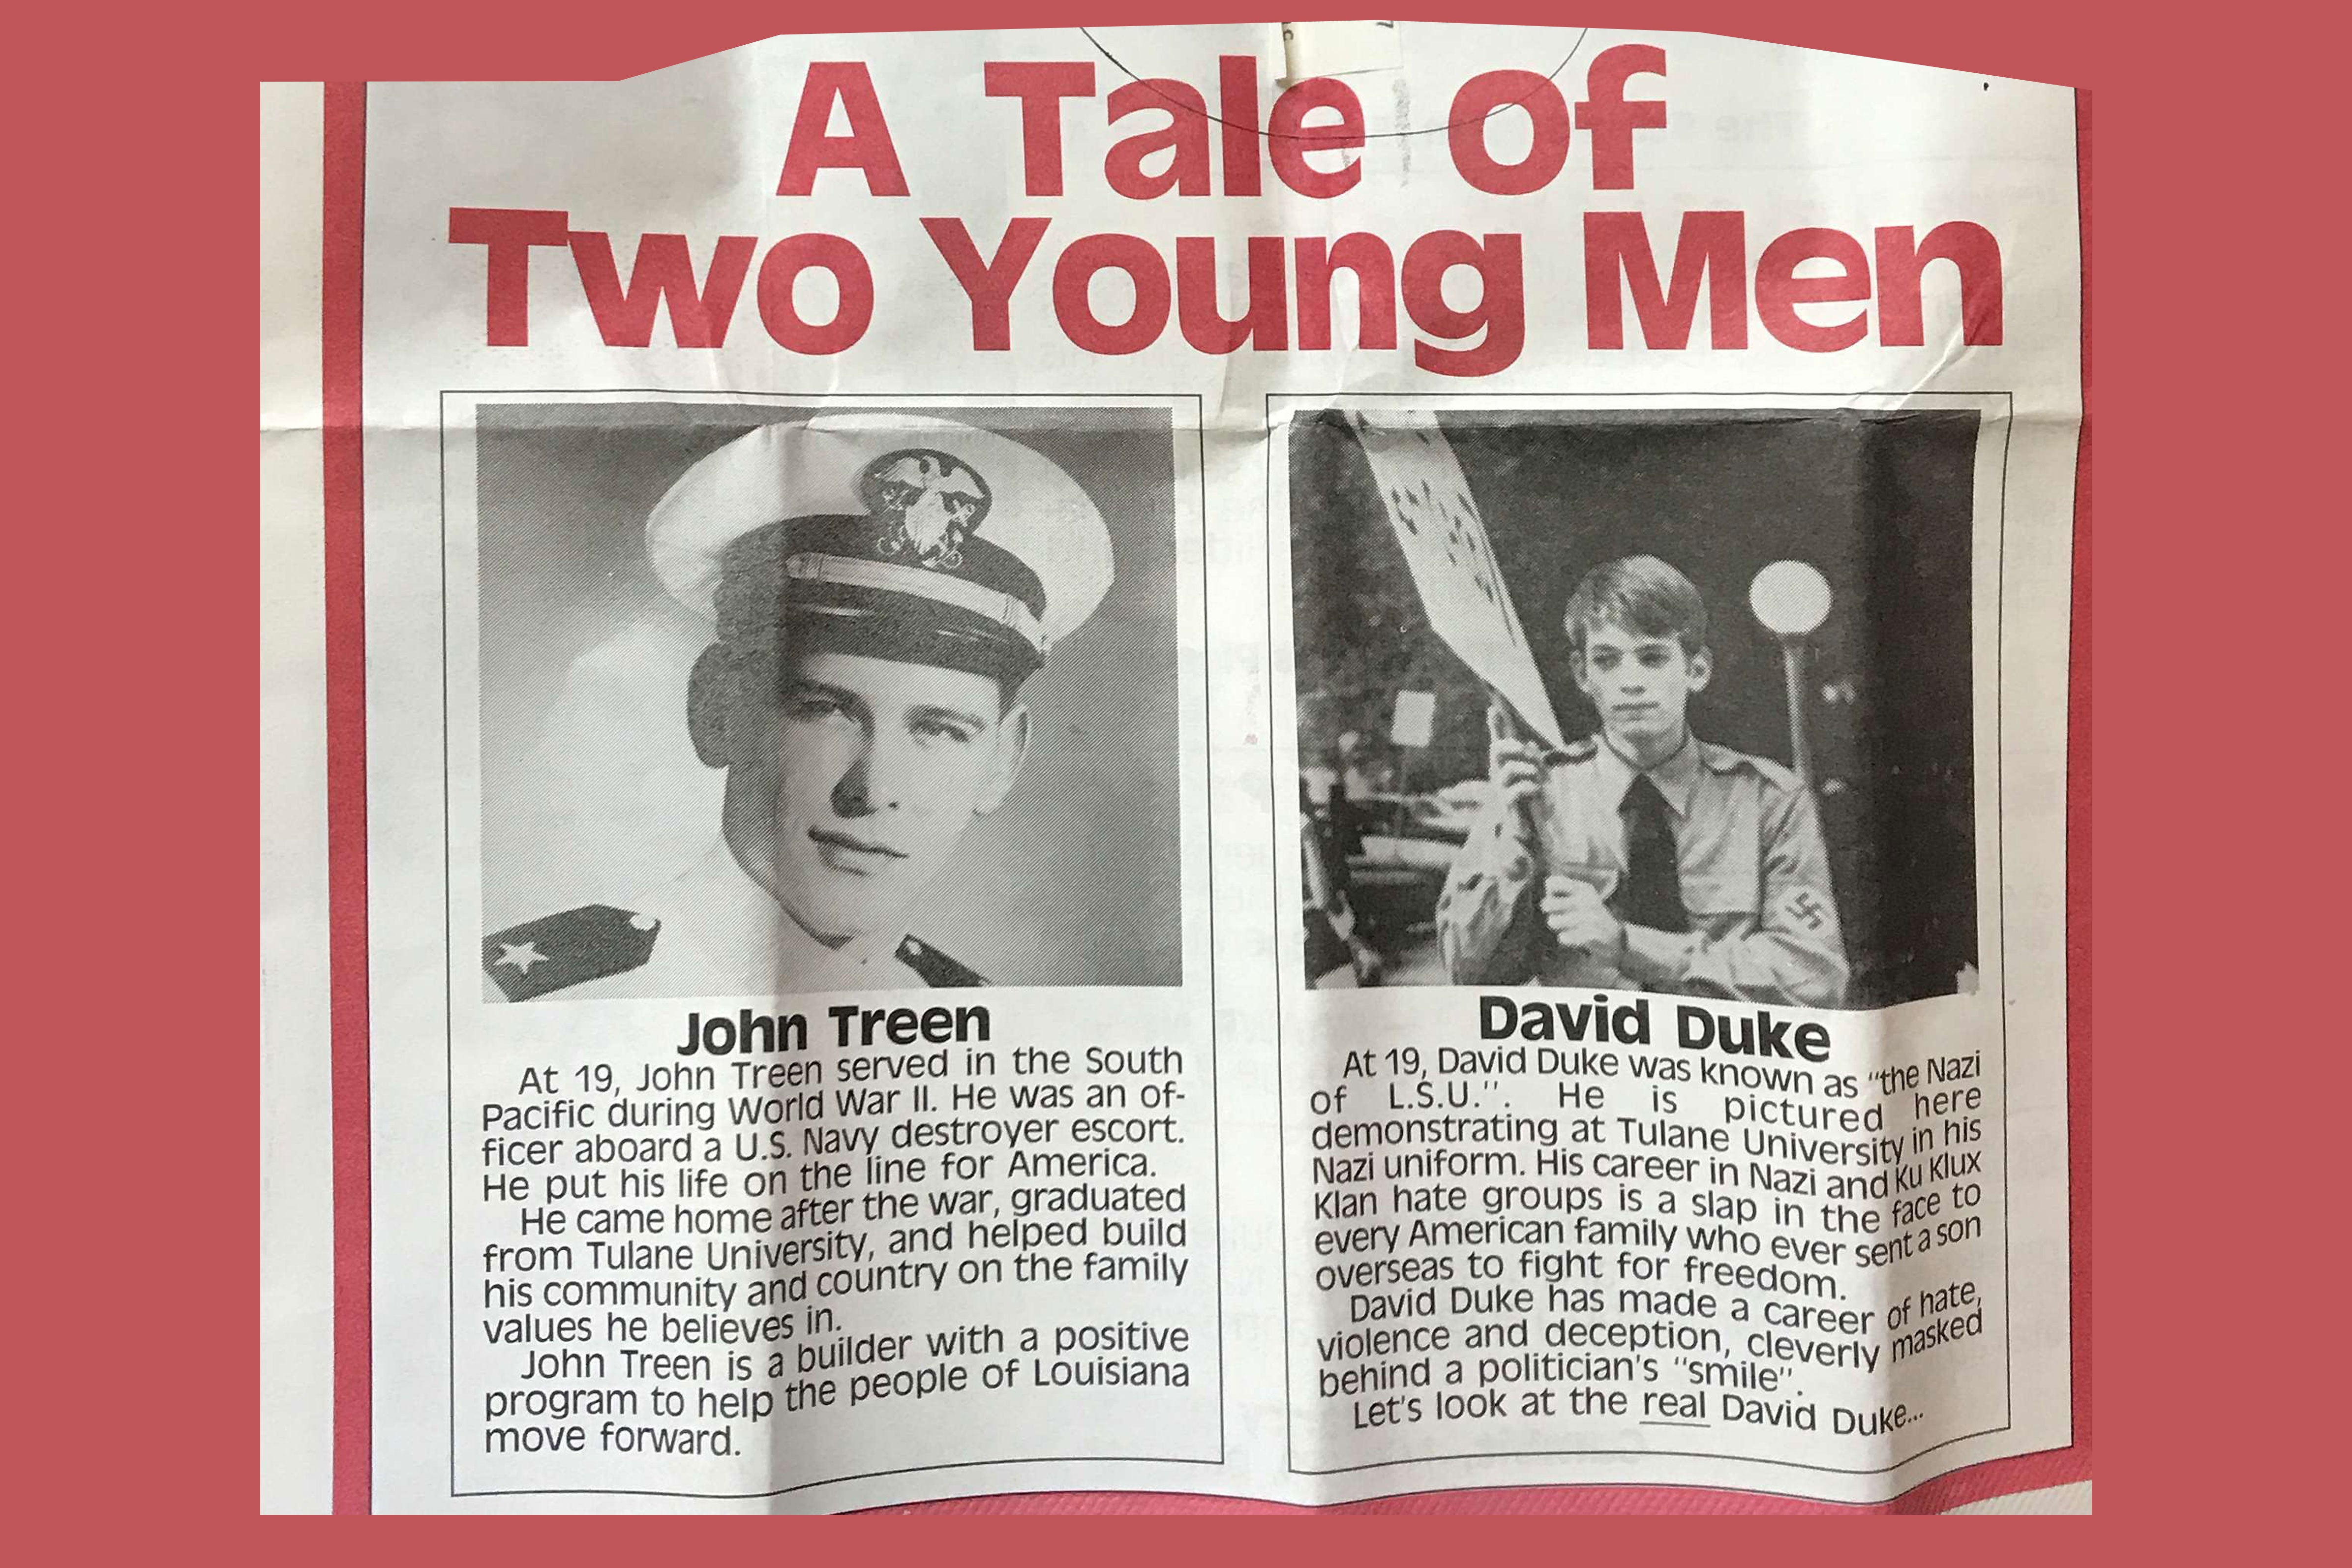 Photo of the flyer described above. It reads "A Tale of Two Young Men," with Treen on left in Navy whites and a description below, and Duke on right in his Nazi brownshirt uniform and description below.